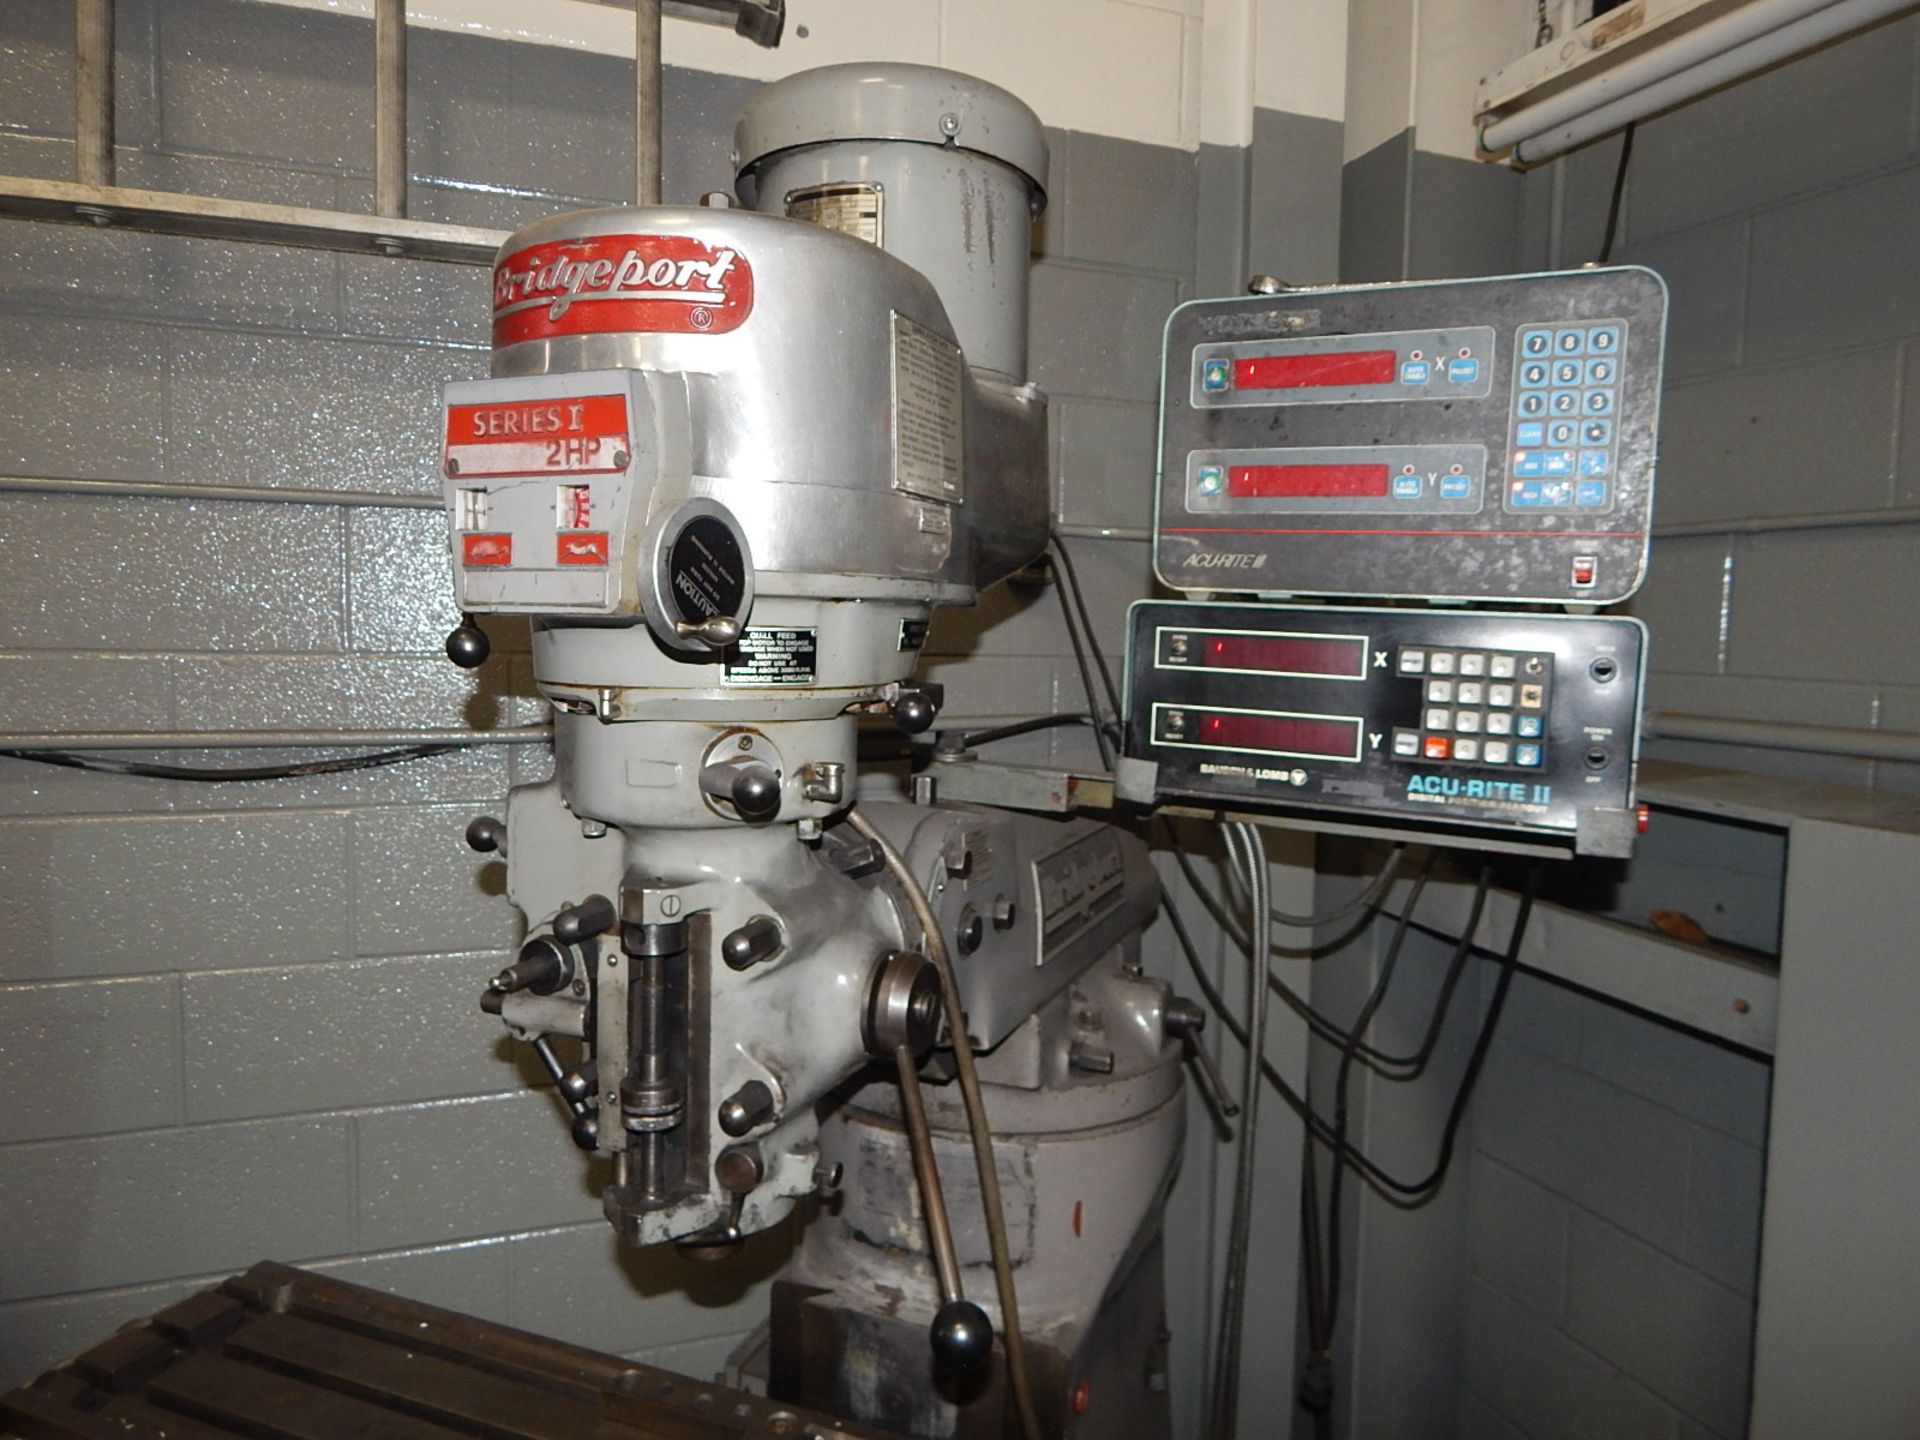 BRIDGEPORT SERIES I VERTICAL TURRET MILL WITH 42"X9" TABLE, SPEEDS TO 4200 RPM, 2 HP, ACCURITE 2 - Image 2 of 3